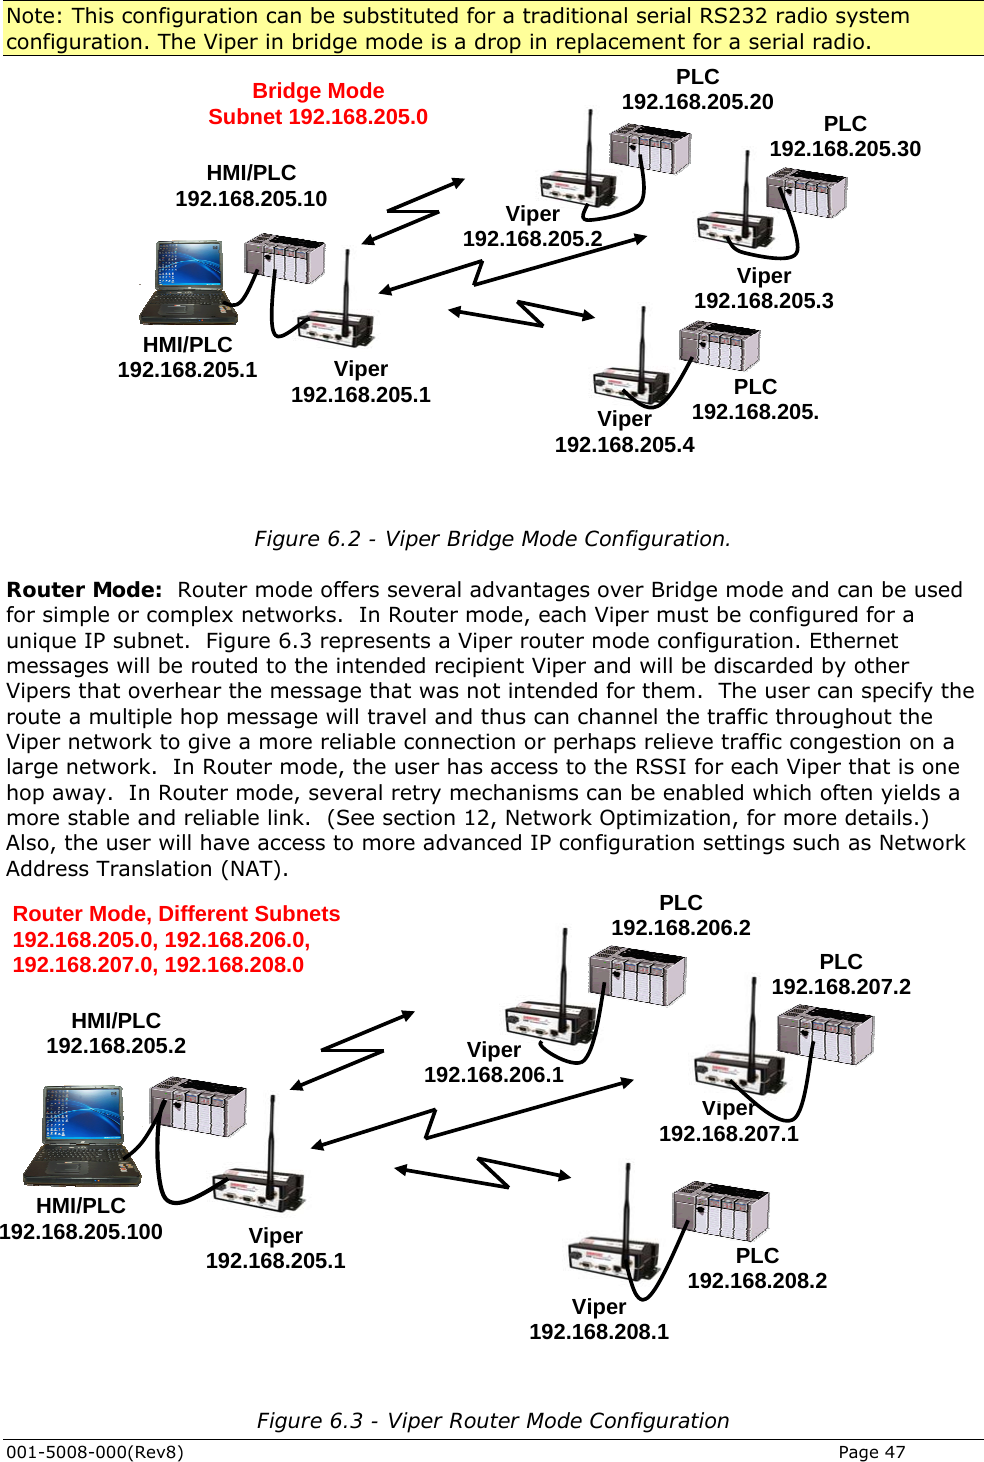  001-5008-000(Rev8)   Page 47 Note: This configuration can be substituted for a traditional serial RS232 radio system configuration. The Viper in bridge mode is a drop in replacement for a serial radio. Viper 192.168.205.1 Viper 192.168.205.3 PLC 192.168.205.HMI/PLC 192.168.205.10 HMI/PLC 192.168.205.1PLC 192.168.205.30PLC 192.168.205.20 Viper 192.168.205.2 Viper 192.168.205.4Bridge Mode Subnet 192.168.205.0  Figure 6.2 - Viper Bridge Mode Configuration.  Router Mode:  Router mode offers several advantages over Bridge mode and can be used for simple or complex networks.  In Router mode, each Viper must be configured for a unique IP subnet.  Figure 6.3 represents a Viper router mode configuration. Ethernet messages will be routed to the intended recipient Viper and will be discarded by other Vipers that overhear the message that was not intended for them.  The user can specify the route a multiple hop message will travel and thus can channel the traffic throughout the Viper network to give a more reliable connection or perhaps relieve traffic congestion on a large network.  In Router mode, the user has access to the RSSI for each Viper that is one hop away.  In Router mode, several retry mechanisms can be enabled which often yields a more stable and reliable link.  (See section 12, Network Optimization, for more details.)  Also, the user will have access to more advanced IP configuration settings such as Network Address Translation (NAT). Viper 192.168.205.1 Viper 192.168.207.1 Viper 192.168.208.1 PLC 192.168.208.2 HMI/PLC 192.168.205.2 HMI/PLC 192.168.205.100 PLC 192.168.207.2PLC 192.168.206.2 Viper 192.168.206.1 Router Mode, Different Subnets  192.168.205.0, 192.168.206.0, 192.168.207.0, 192.168.208.0  Figure 6.3 - Viper Router Mode Configuration